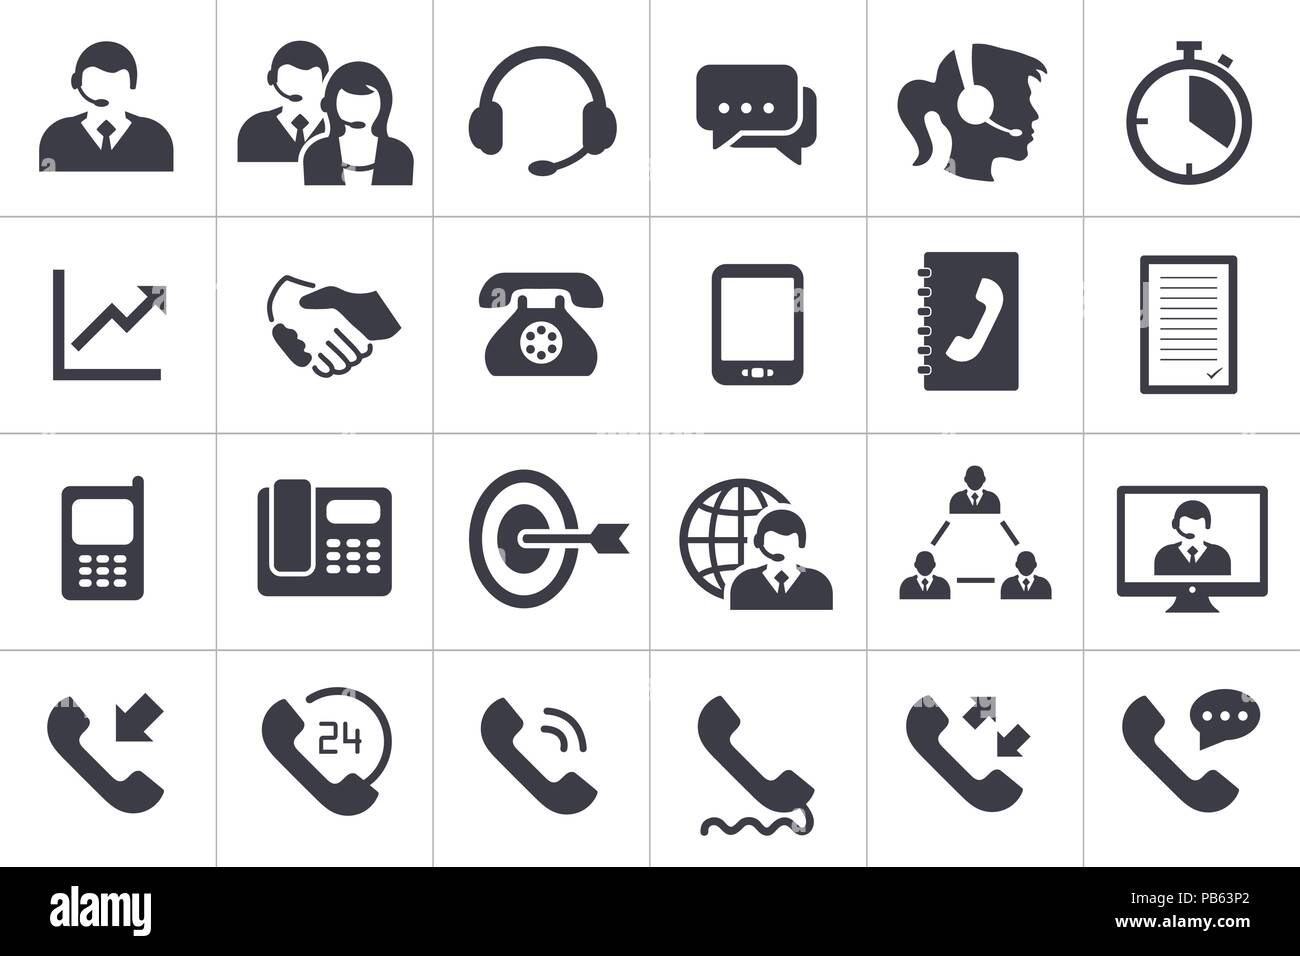 A Collection of Call Center and Communication Icons - Vector Art Stock Vector